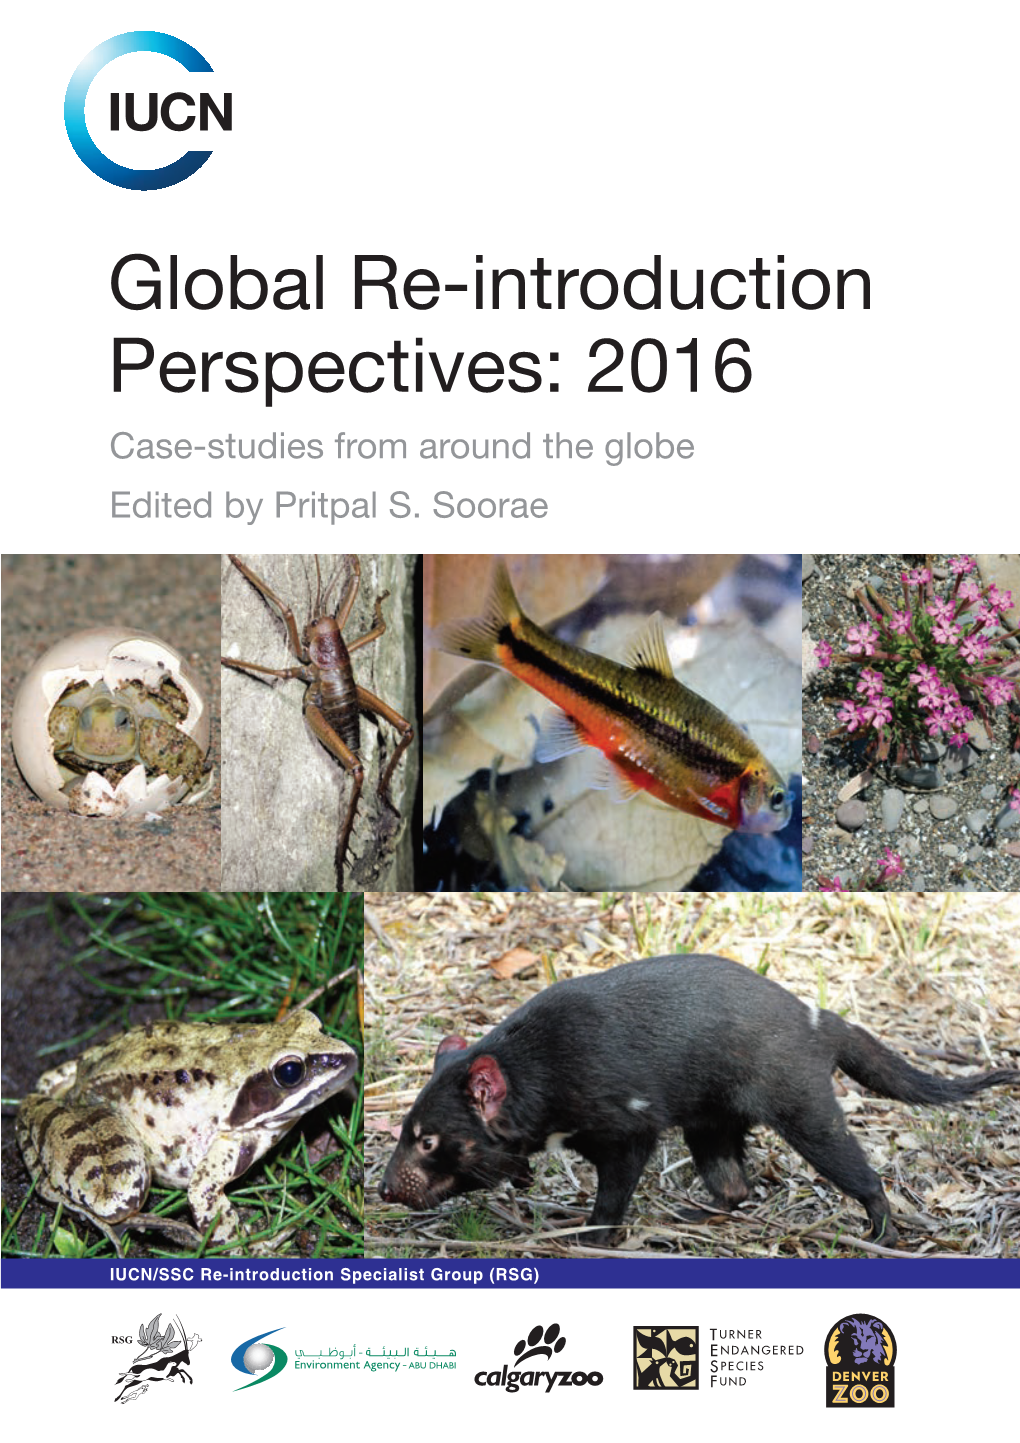 IUCN/SSC Re-Introduction Specialist Group (RSG)